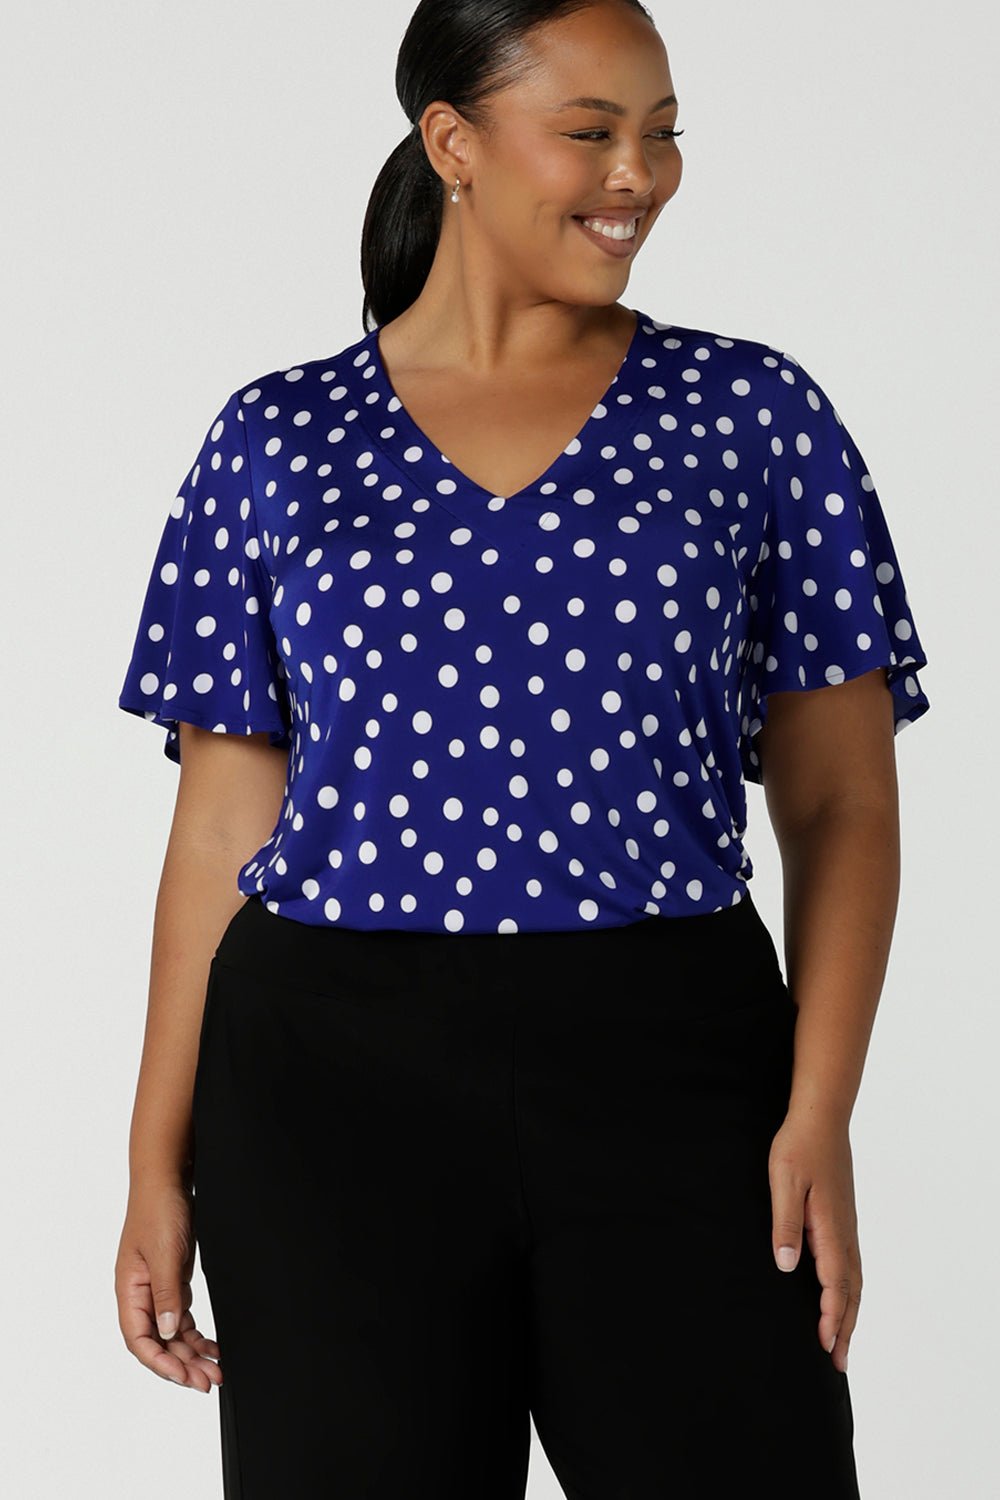 Lila Top in Cobalt spot, V-Neckline with flutter sleeves and a curved hemline. Solf silky jersey and made in Australia for women size 8 - 24.